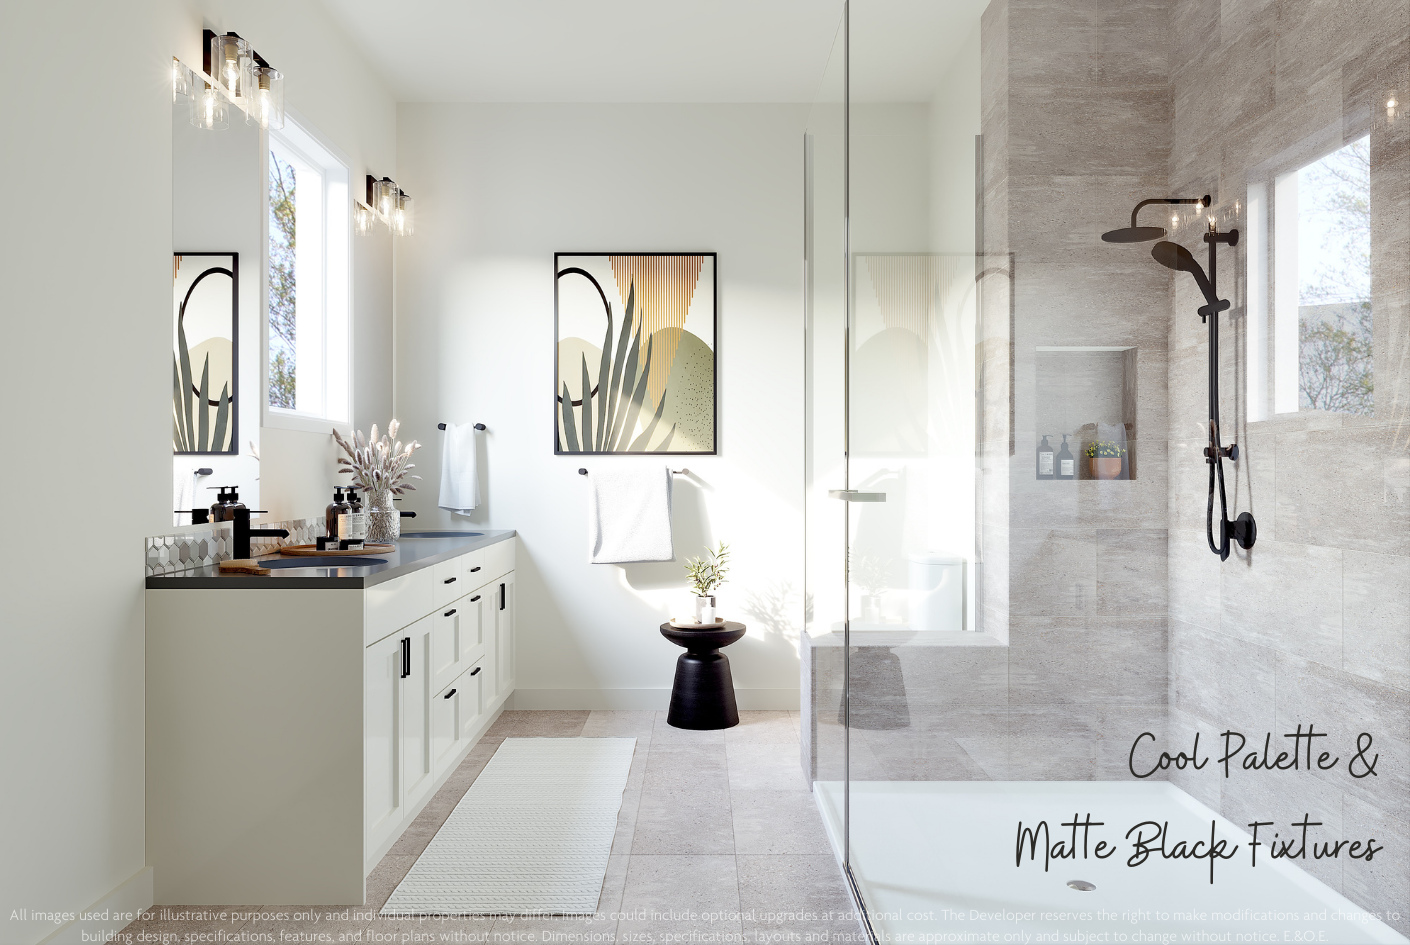 Lakeside Estates ensuite rendered in the cool palette